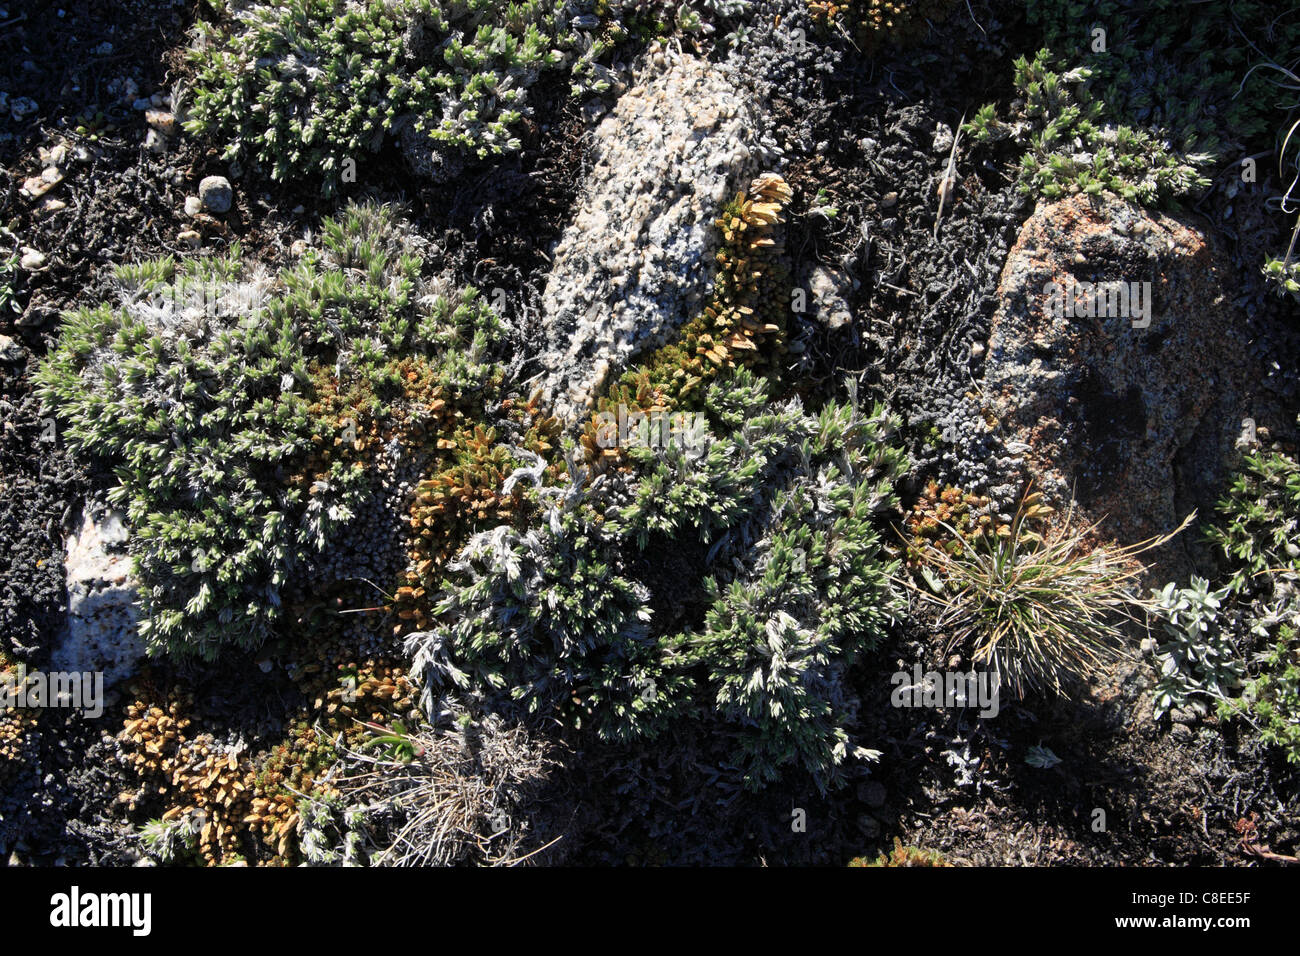 detail of alpine tundra growing in the high Sierra Nevada mountains Stock Photo